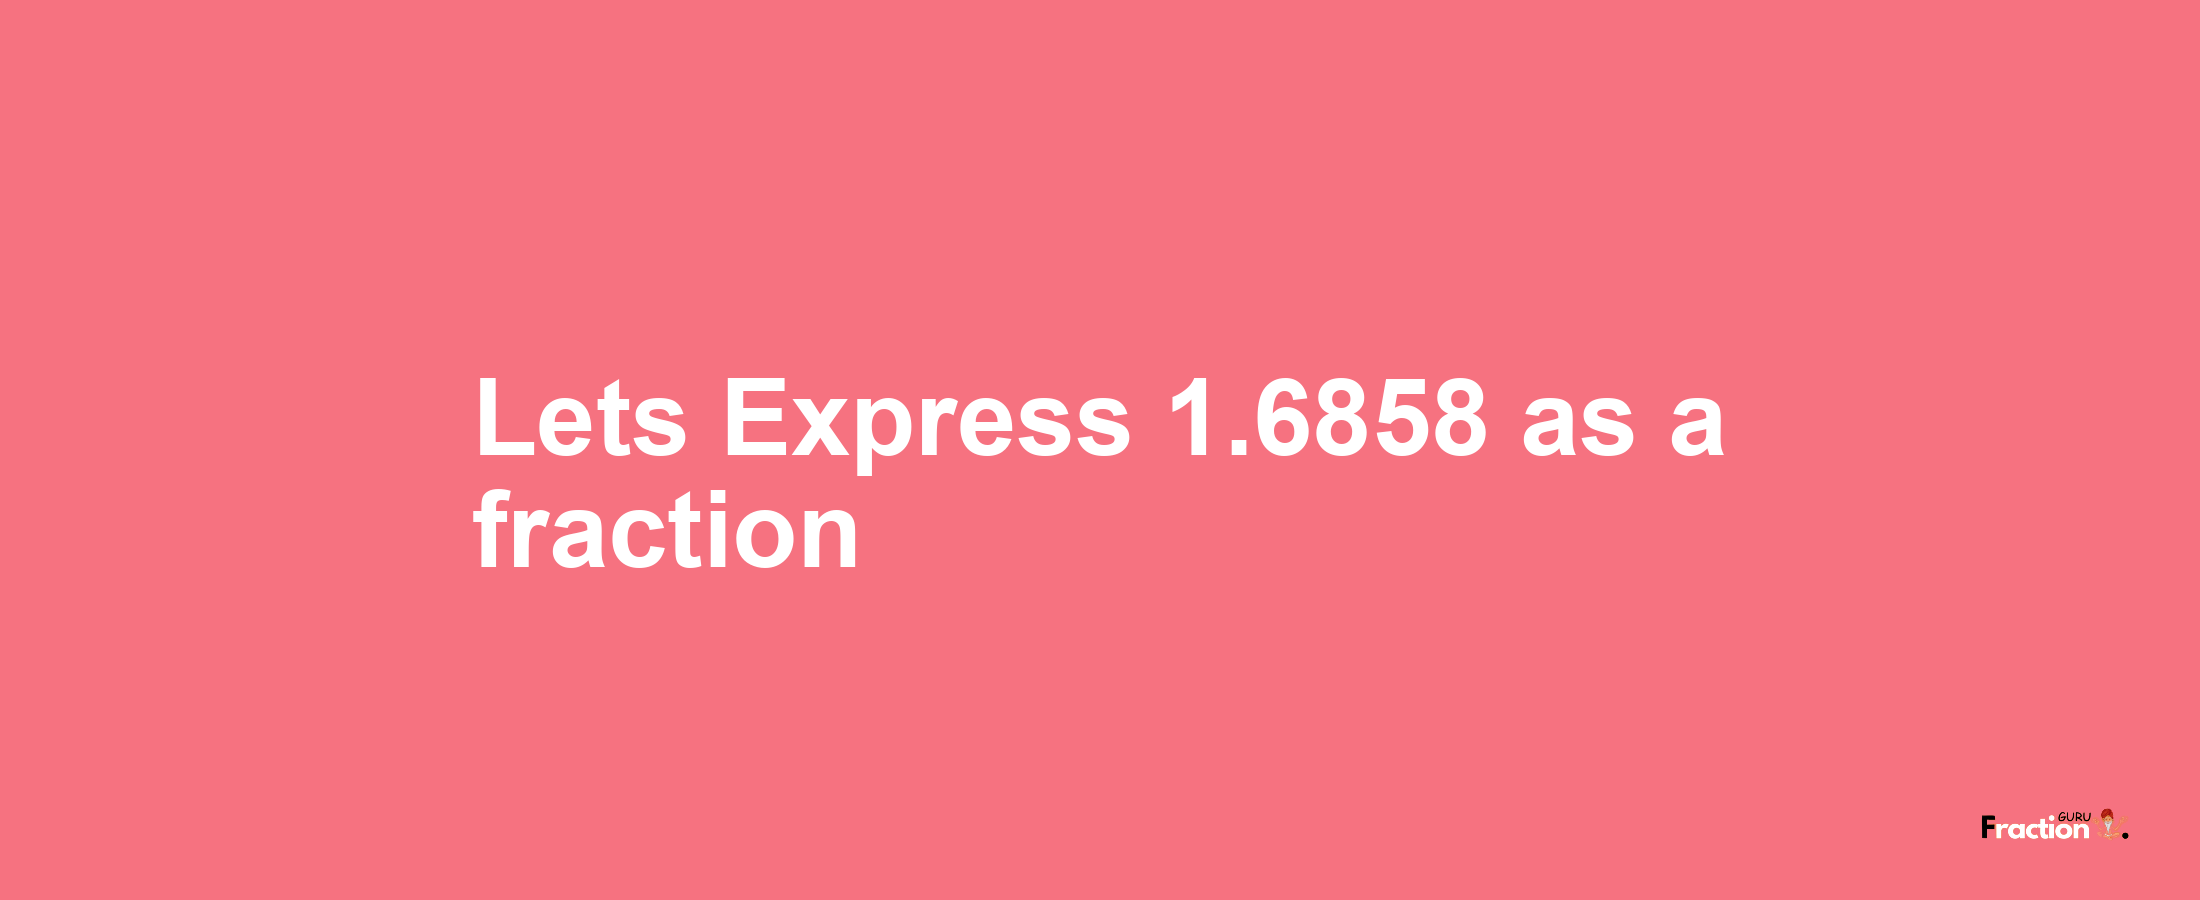 Lets Express 1.6858 as afraction